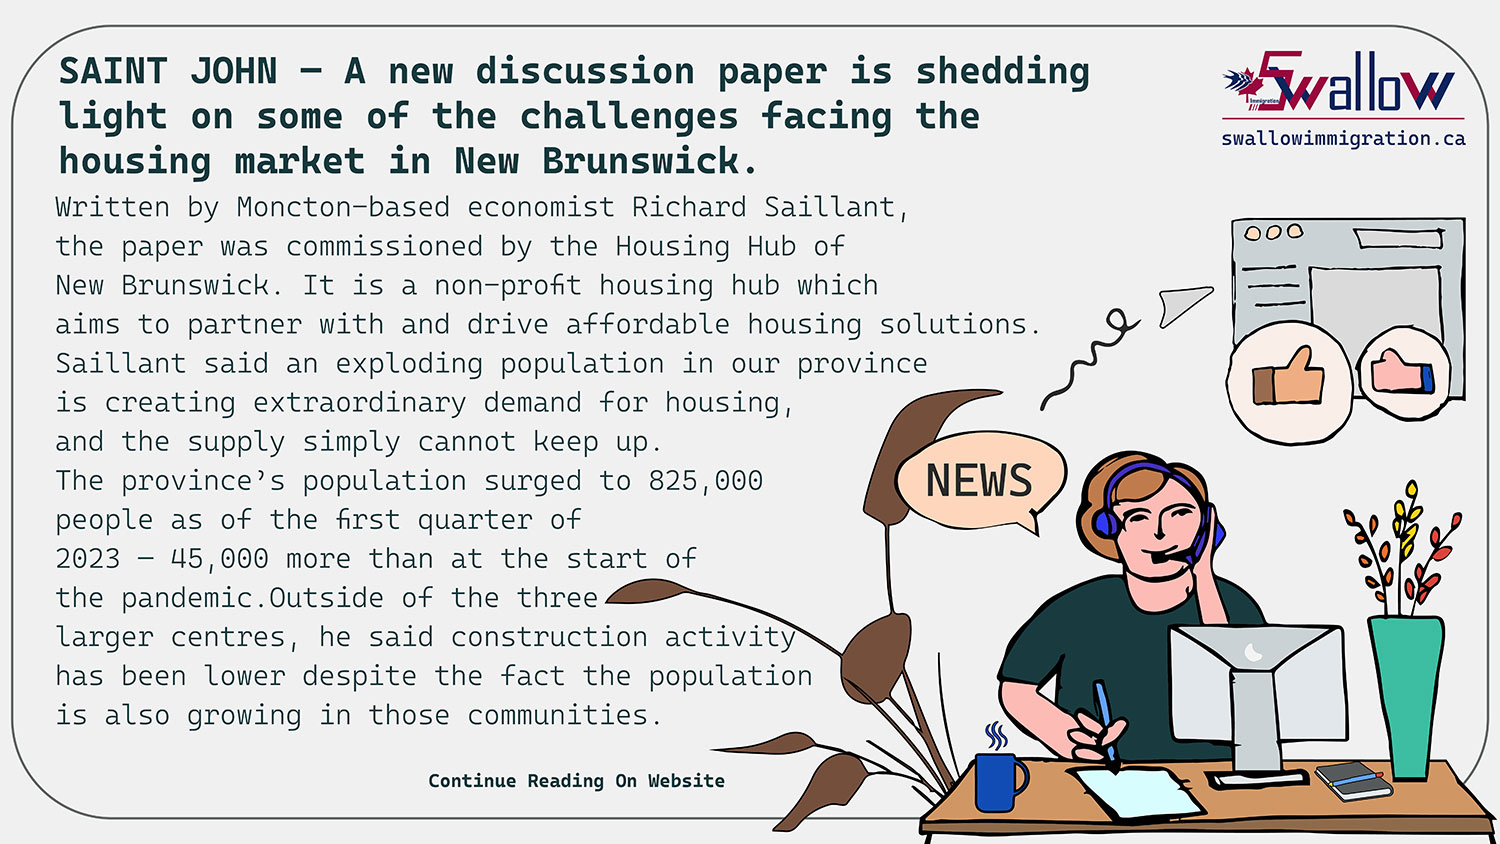 SAINT JOHN — A new discussion paper is shedding light on some of the challenges facing the housing market in New Brunswick.